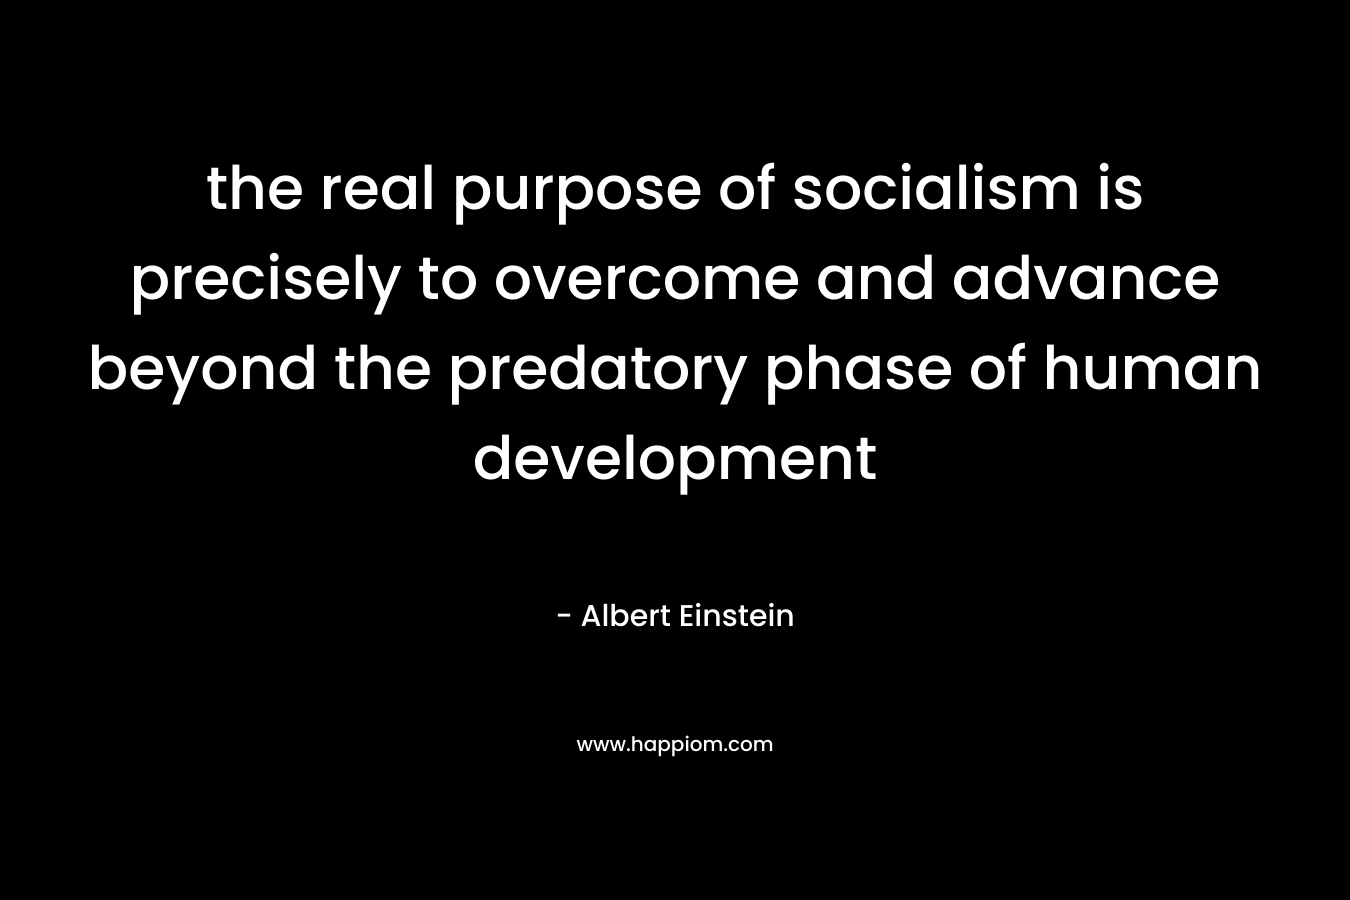 the real purpose of socialism is precisely to overcome and advance beyond the predatory phase of human development – Albert Einstein